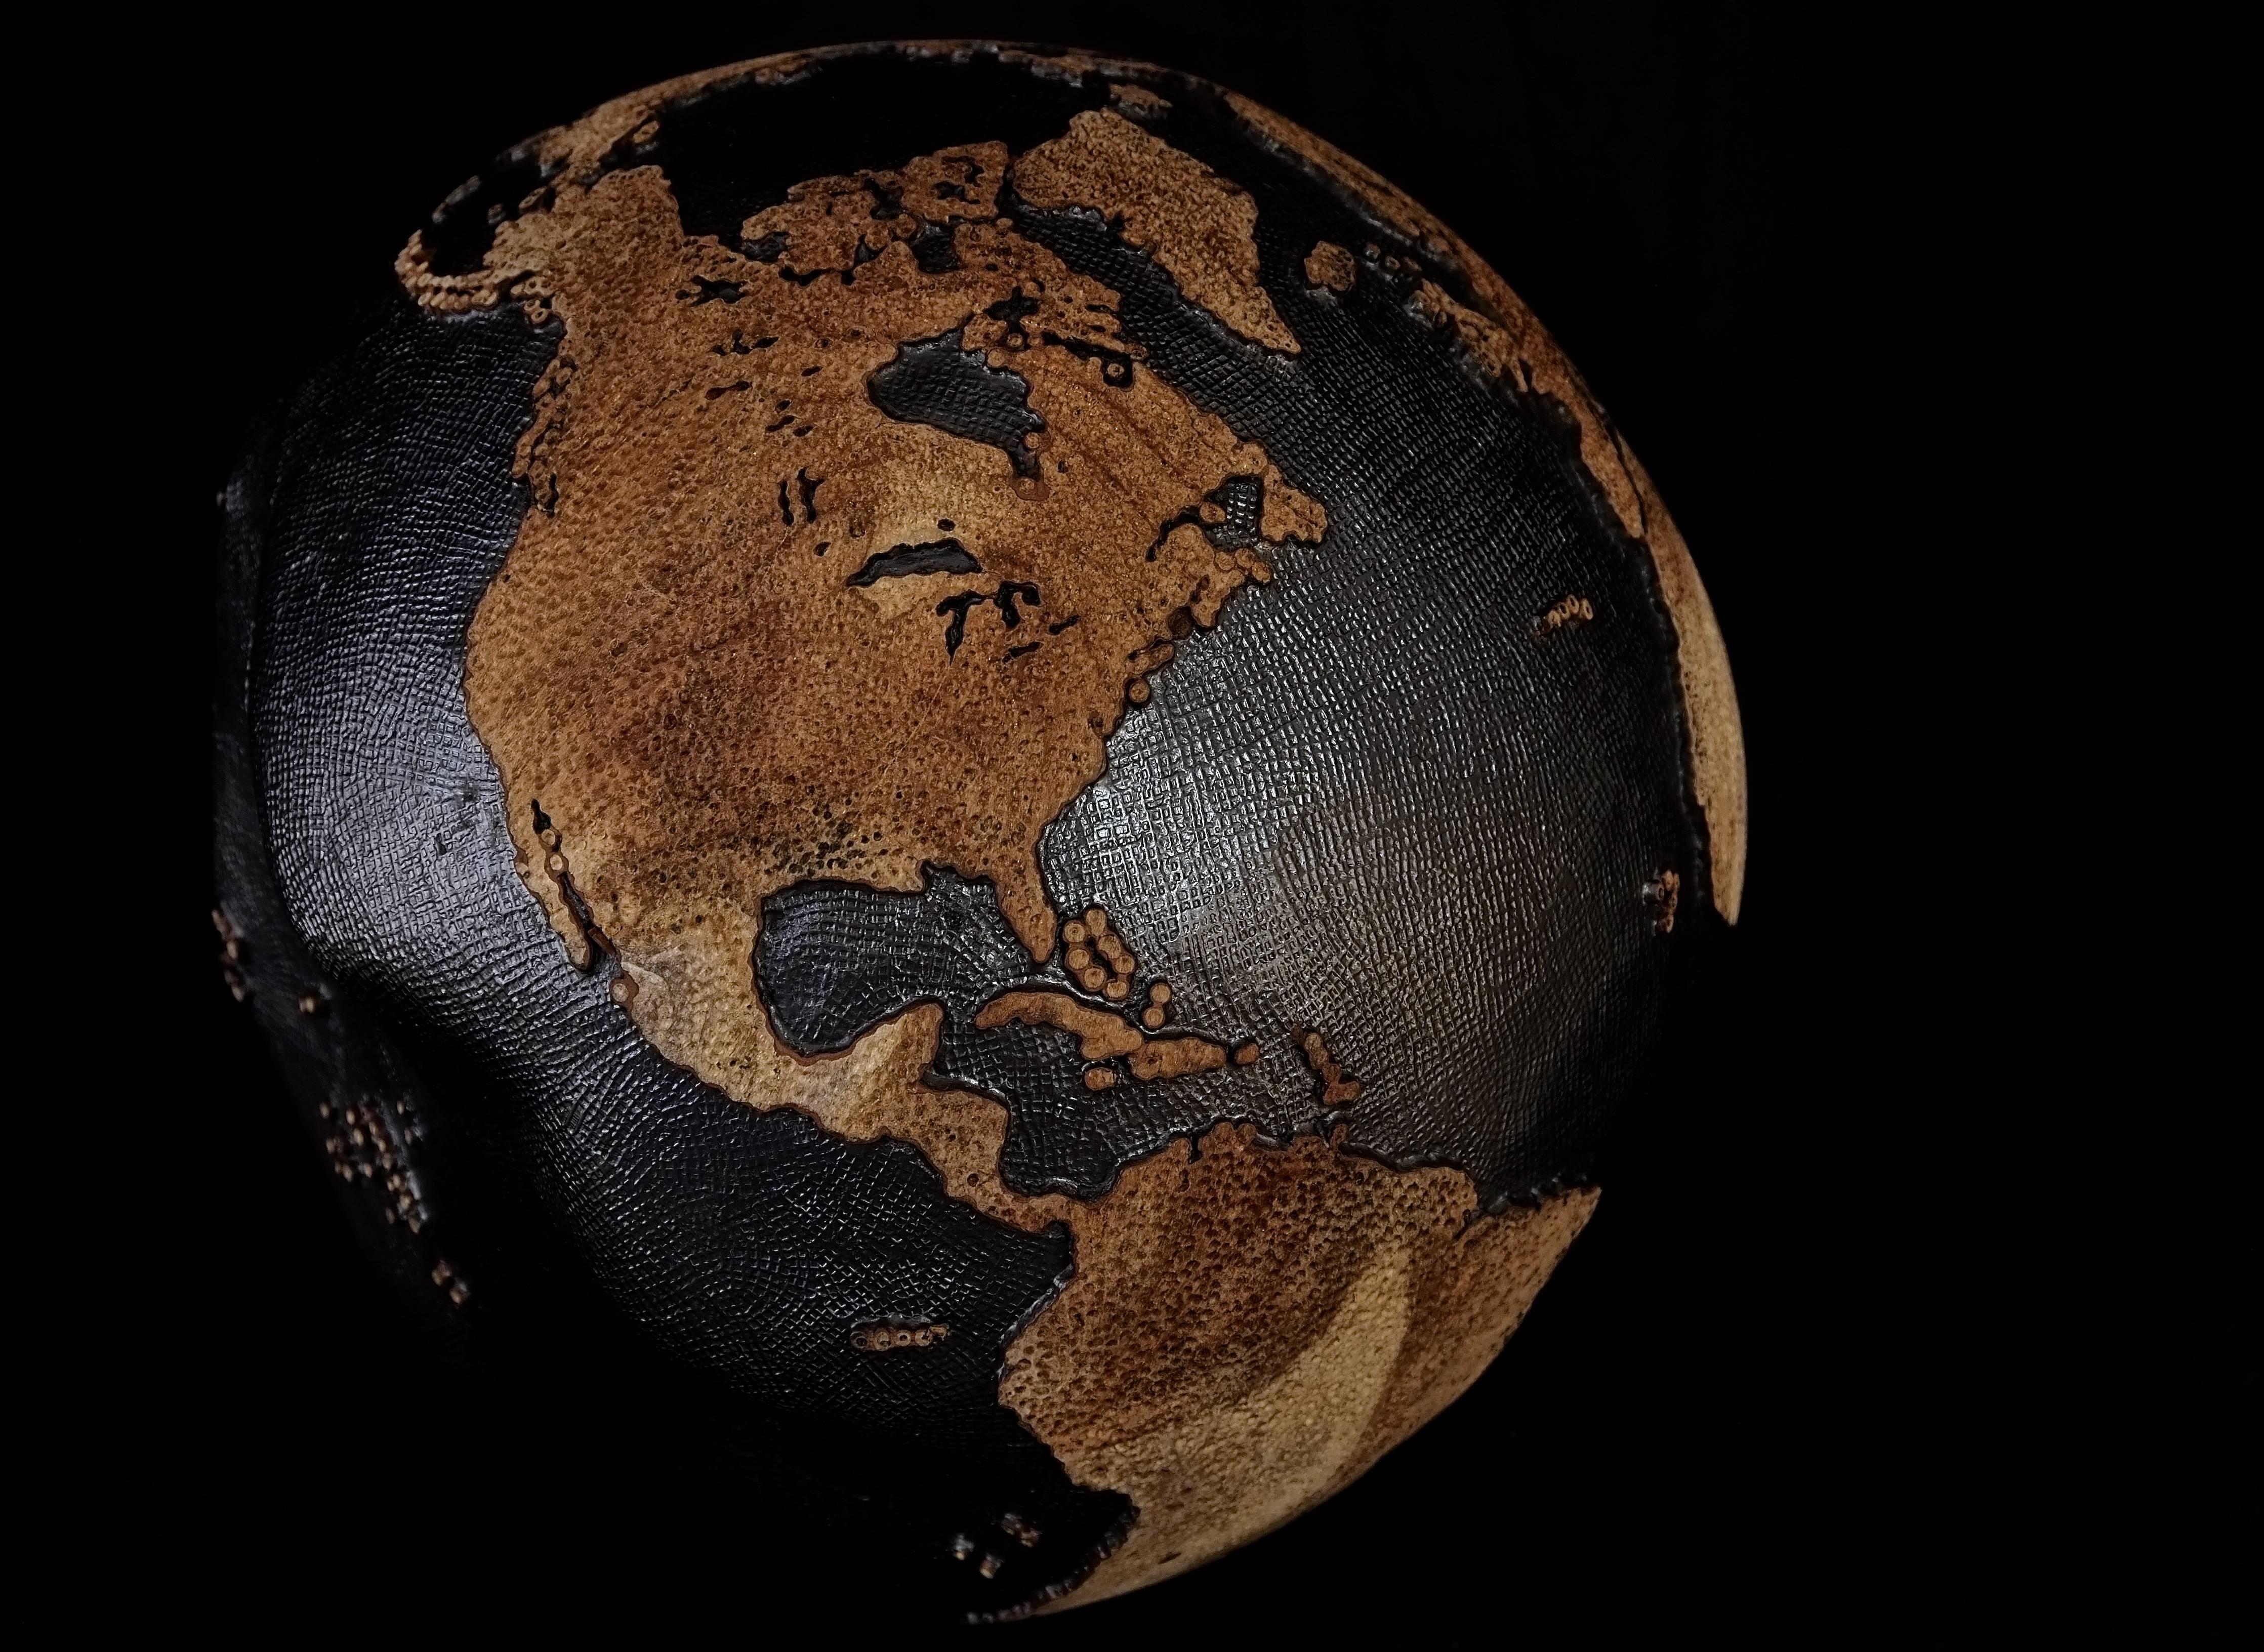 One of a kind teak root globe 30 cm hand-carved / mounted on a rotative base
Hammered copper inlay on oceans / finishing graphite
Skin hammered on continents / finishing natural. 

      